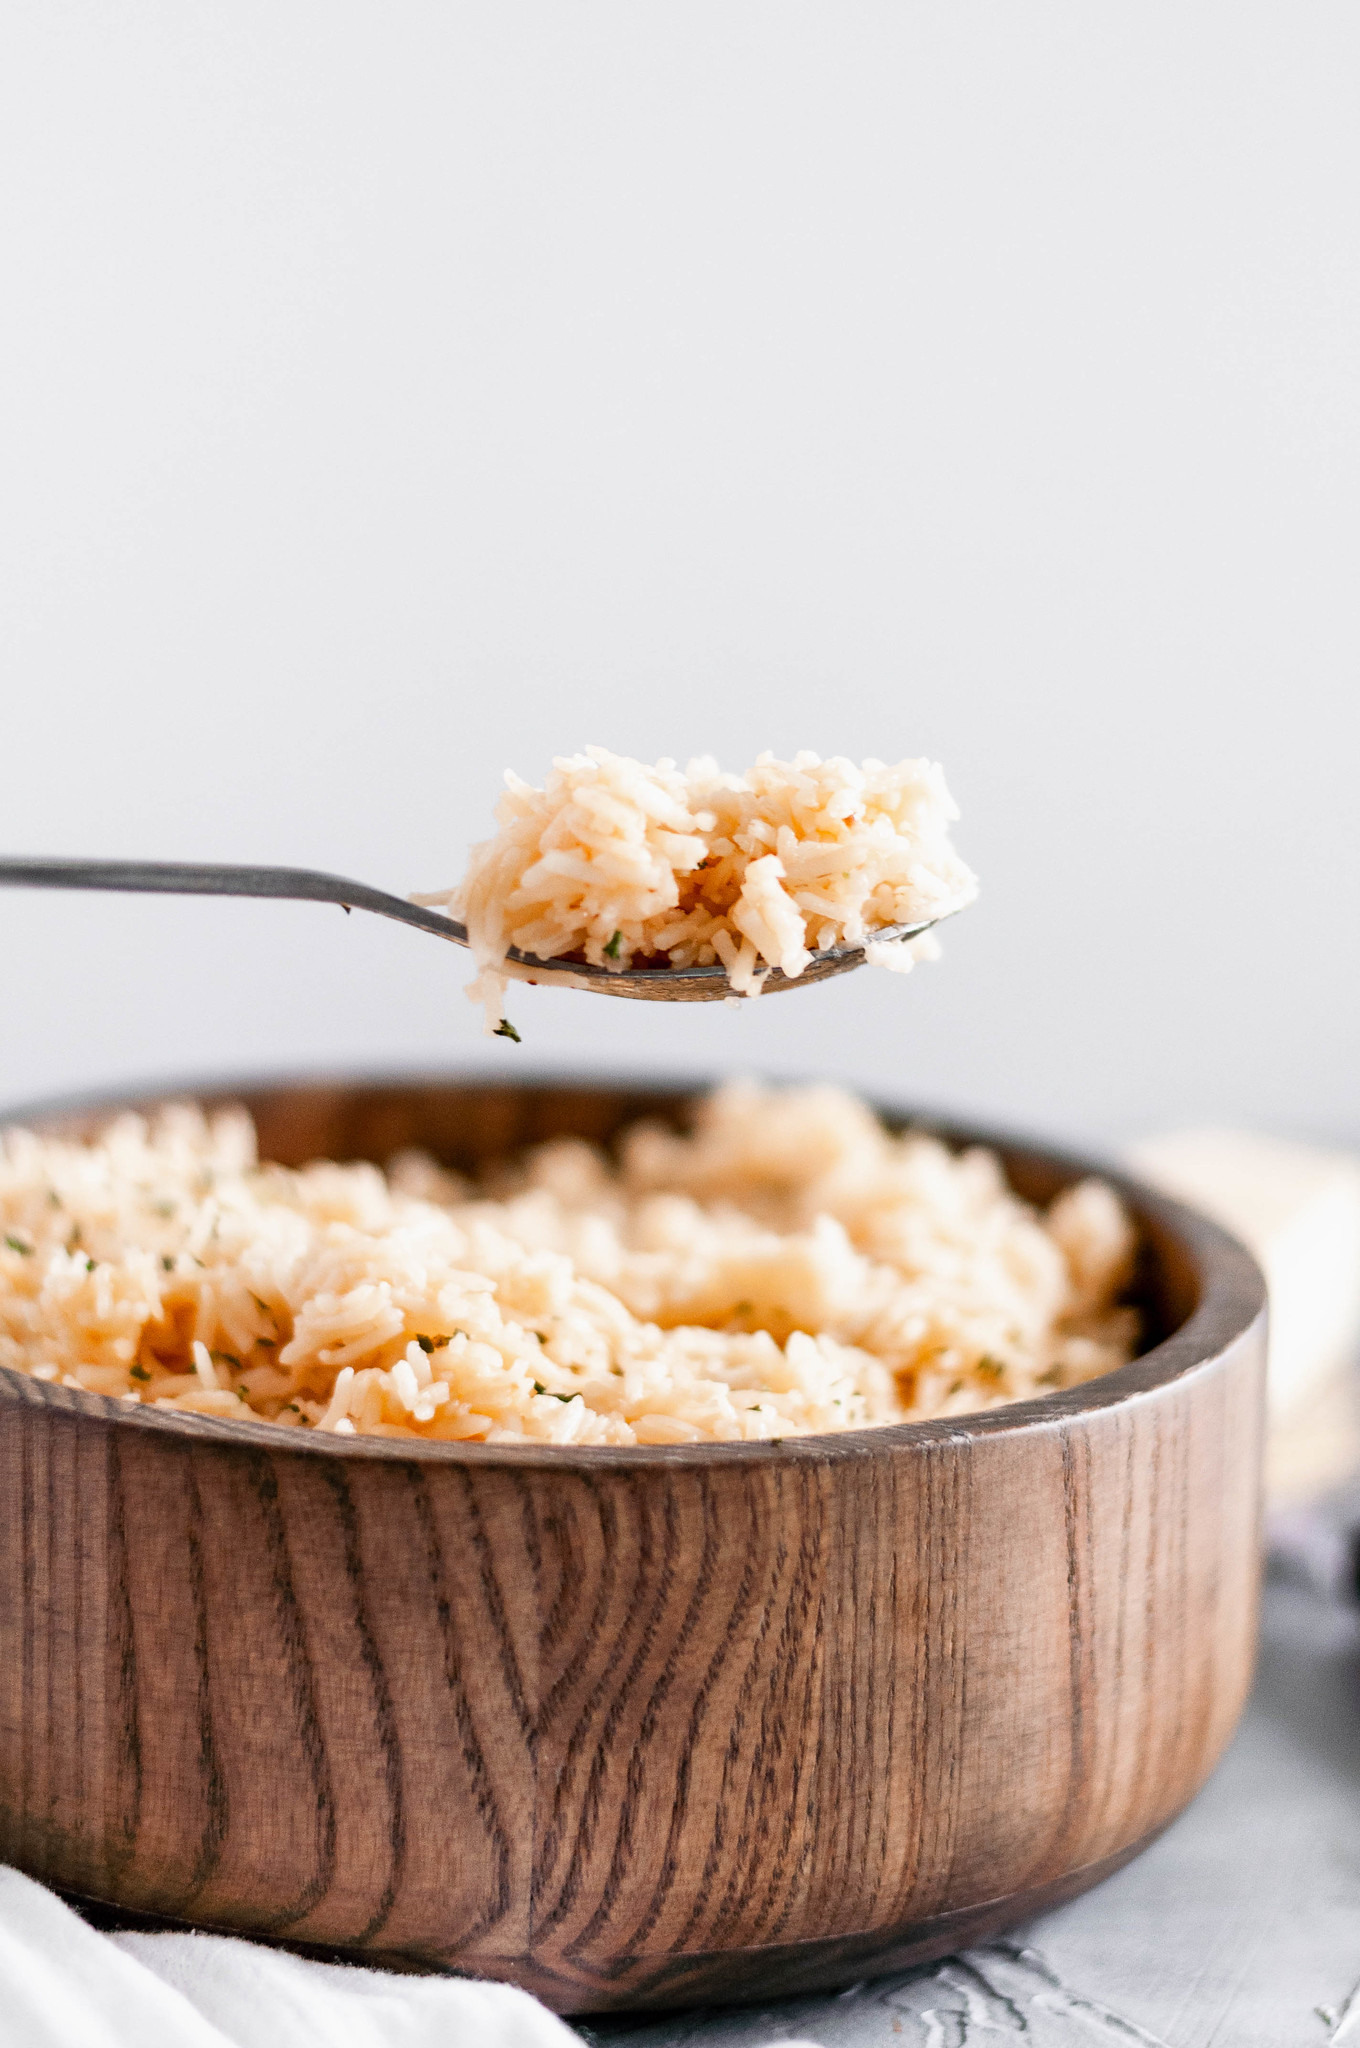 Looking for a quick and simple side dish? This Garlic Parmesan Rice only requires a handful of ingredients and comes together super easily.